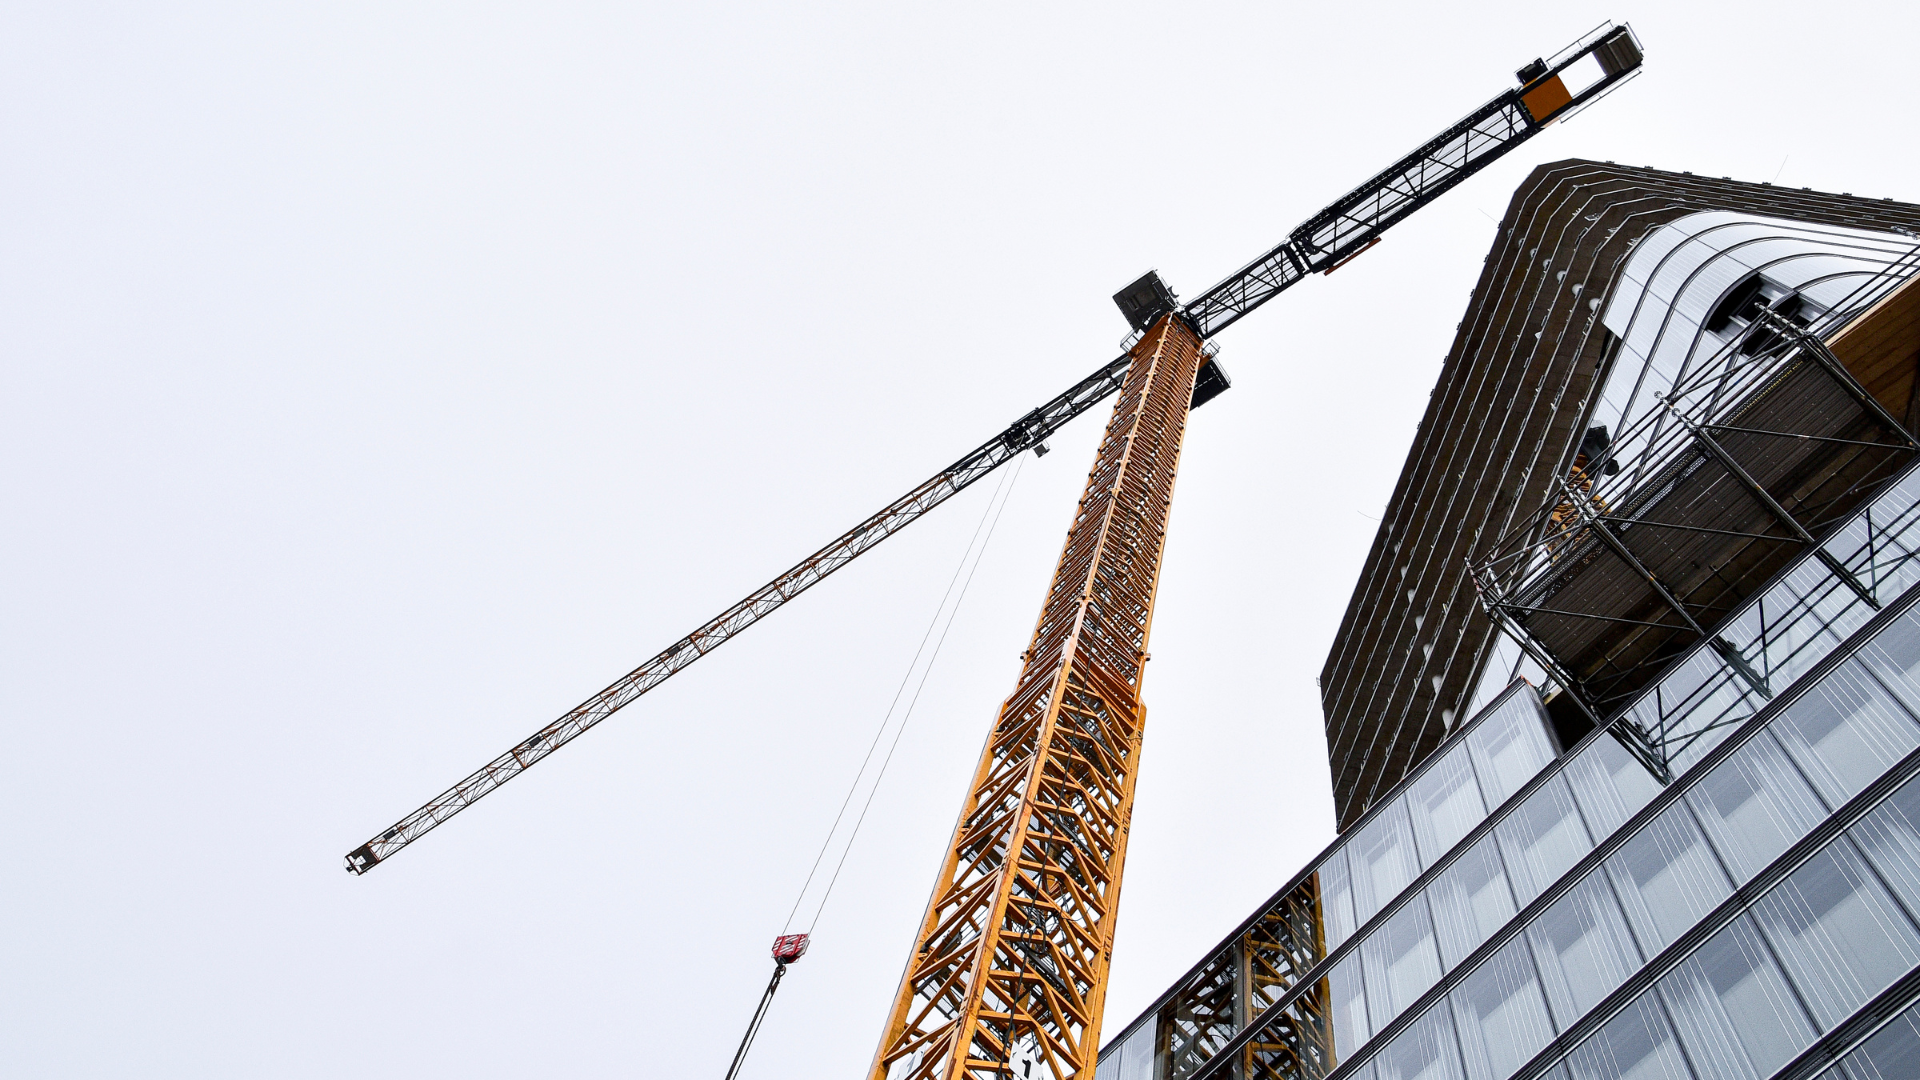 A crane on a construction site viewed from an upwards angle